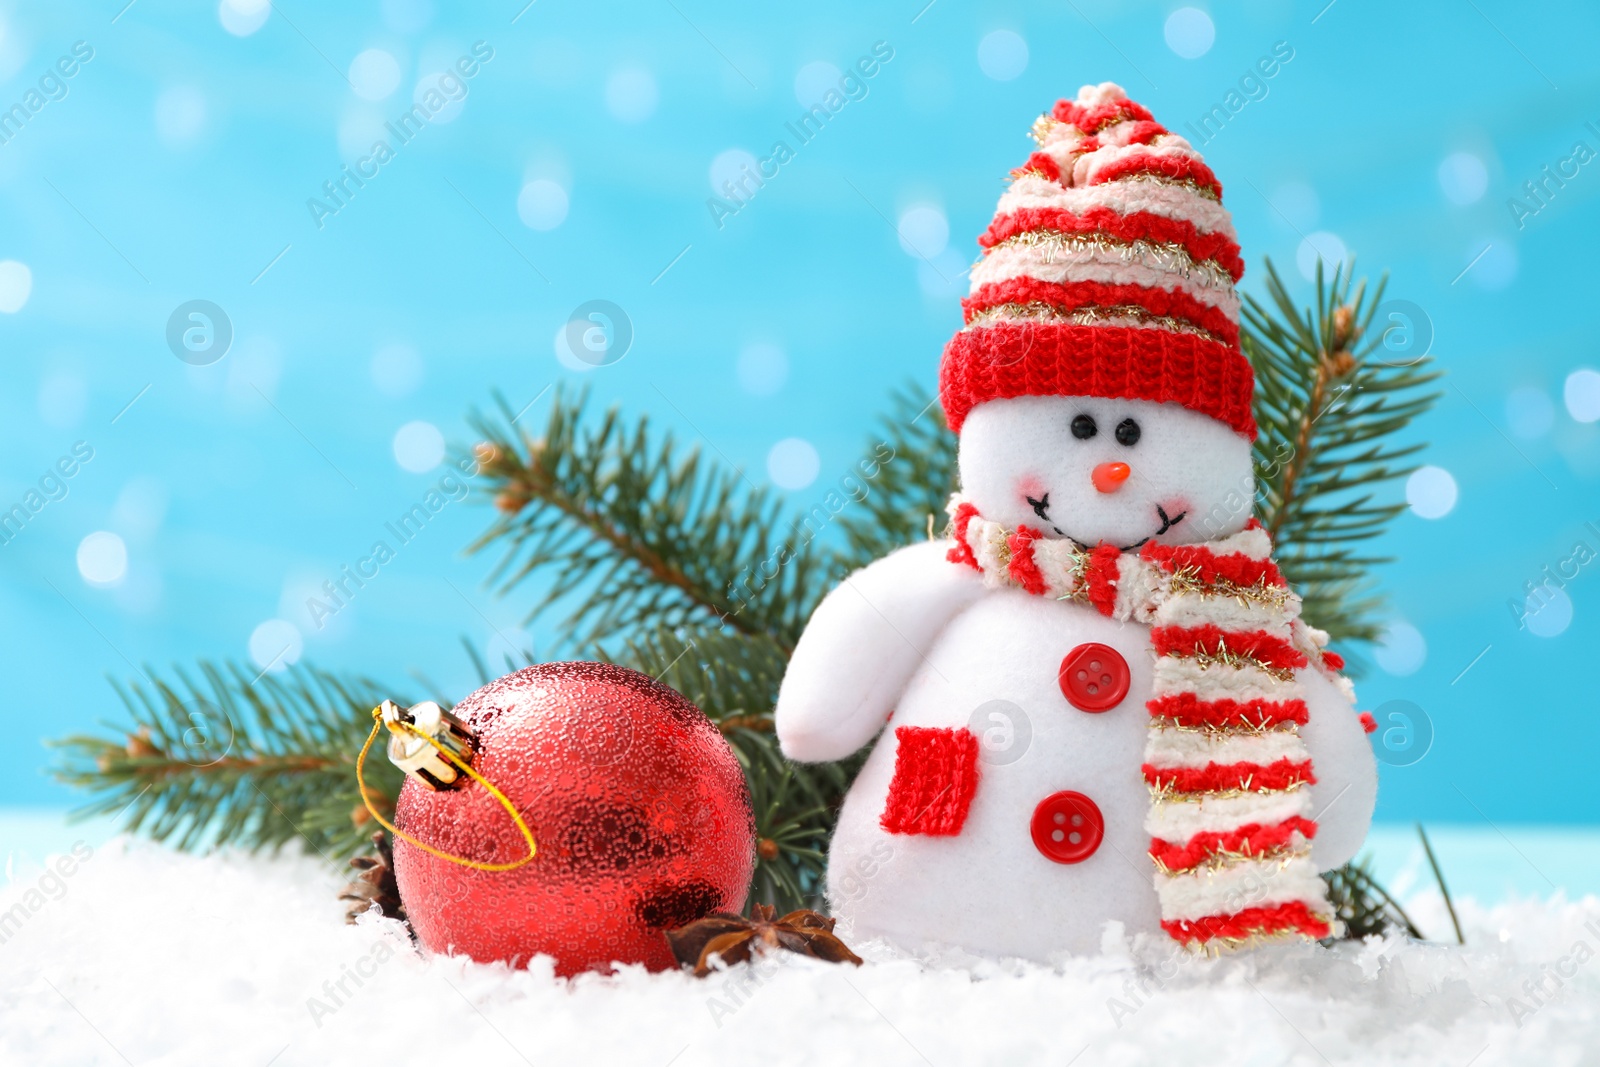 Photo of Cute toy snowman, fir branch and Christmas ball on snow against blurred background